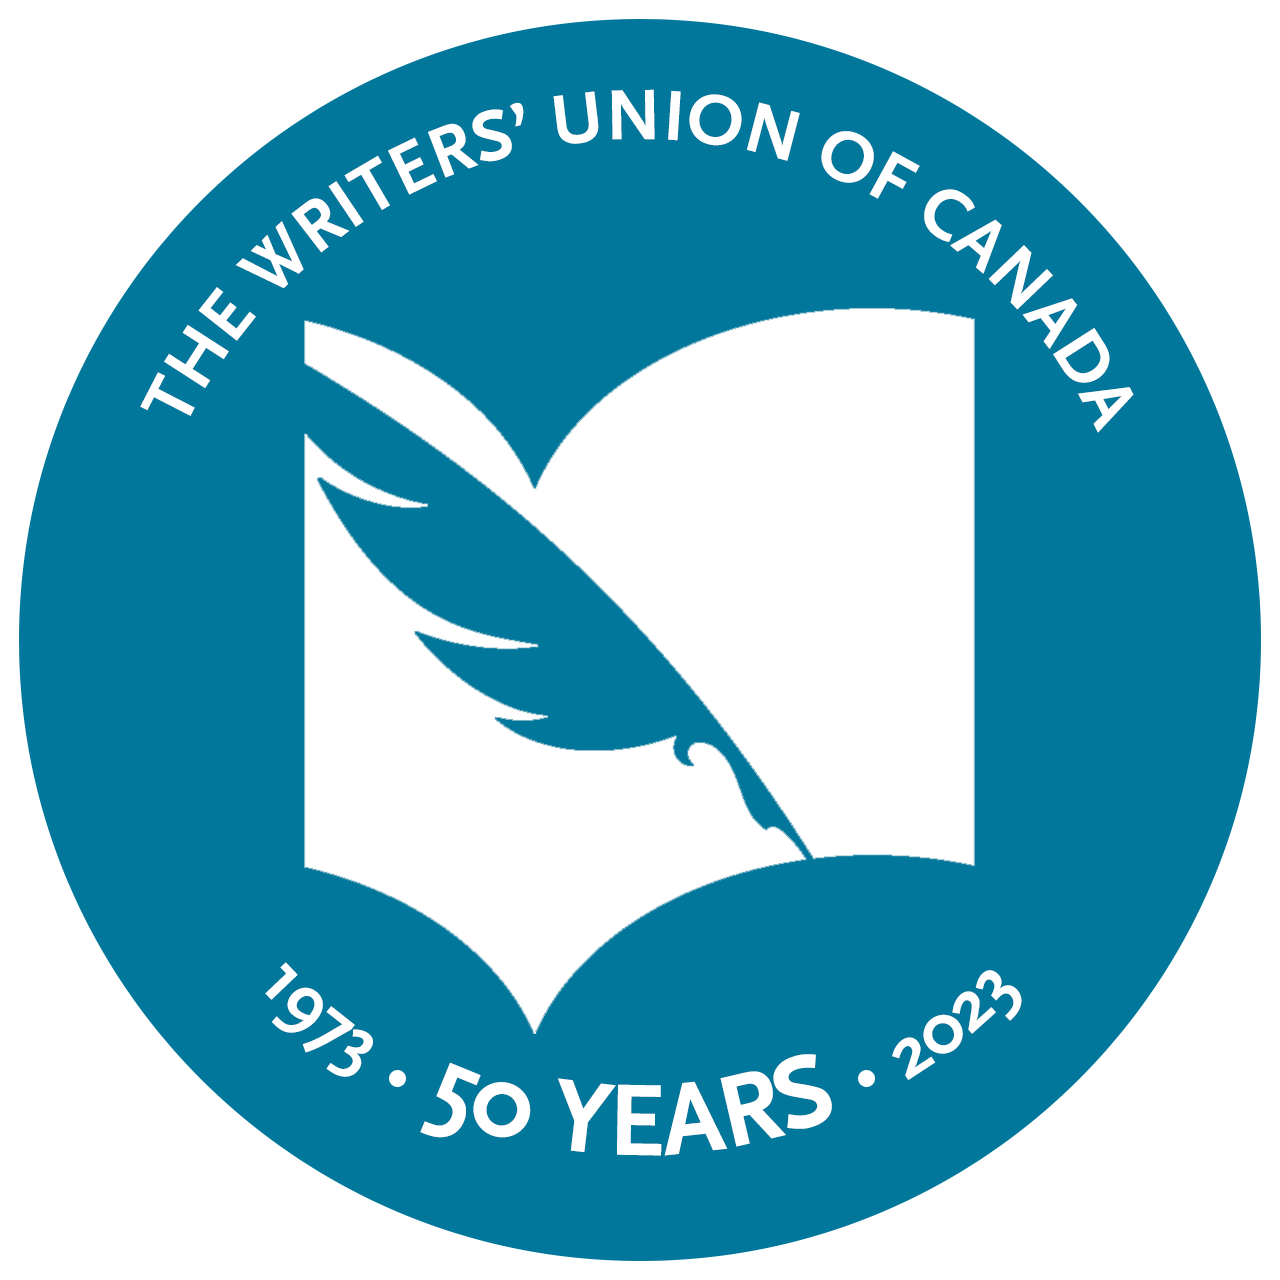 50 Years The Writers' Union of Canada